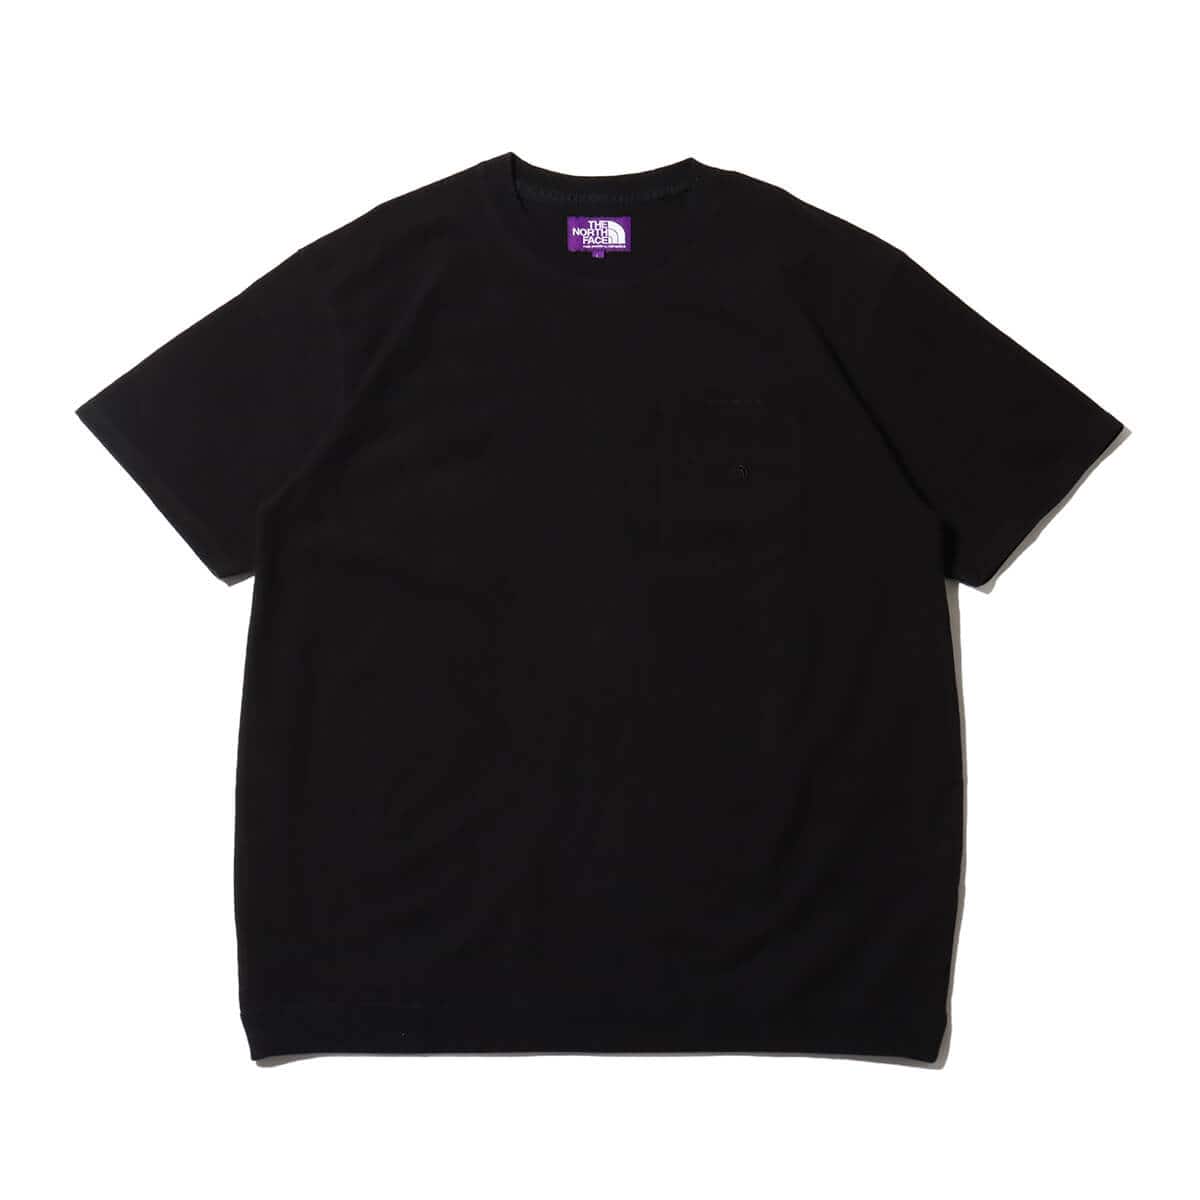 THE NORTH FACE PURPLE LABEL High Bulky Pocket Tee Black